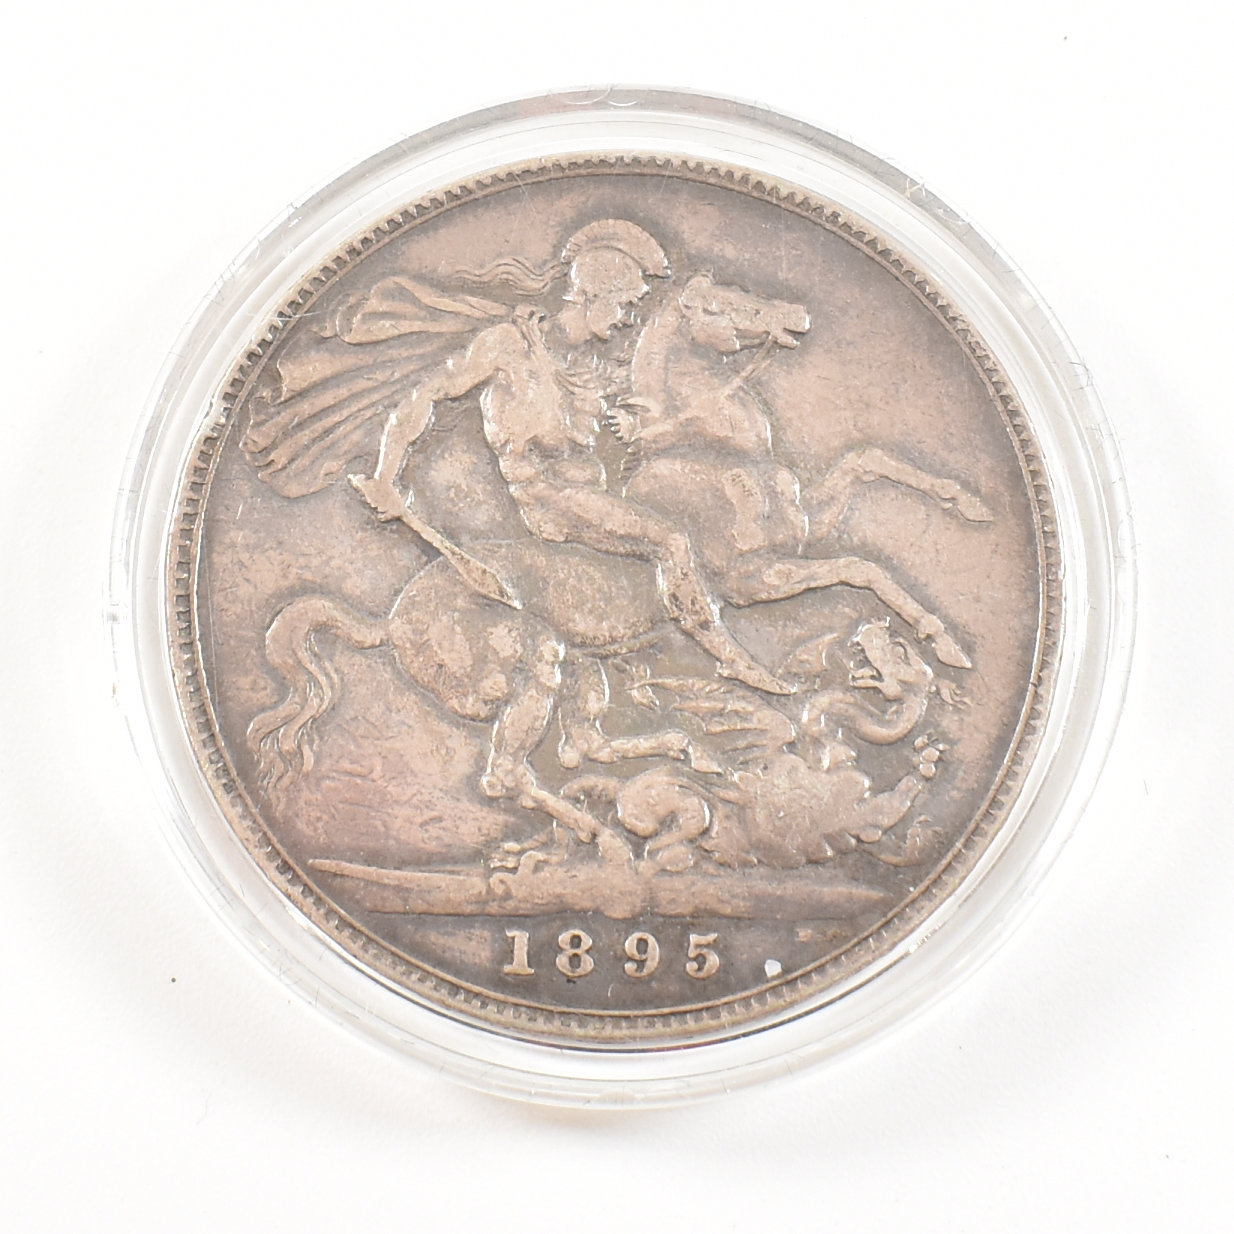 CASED 1895 SILVER CROWN COIN VICTORIA - Image 4 of 4